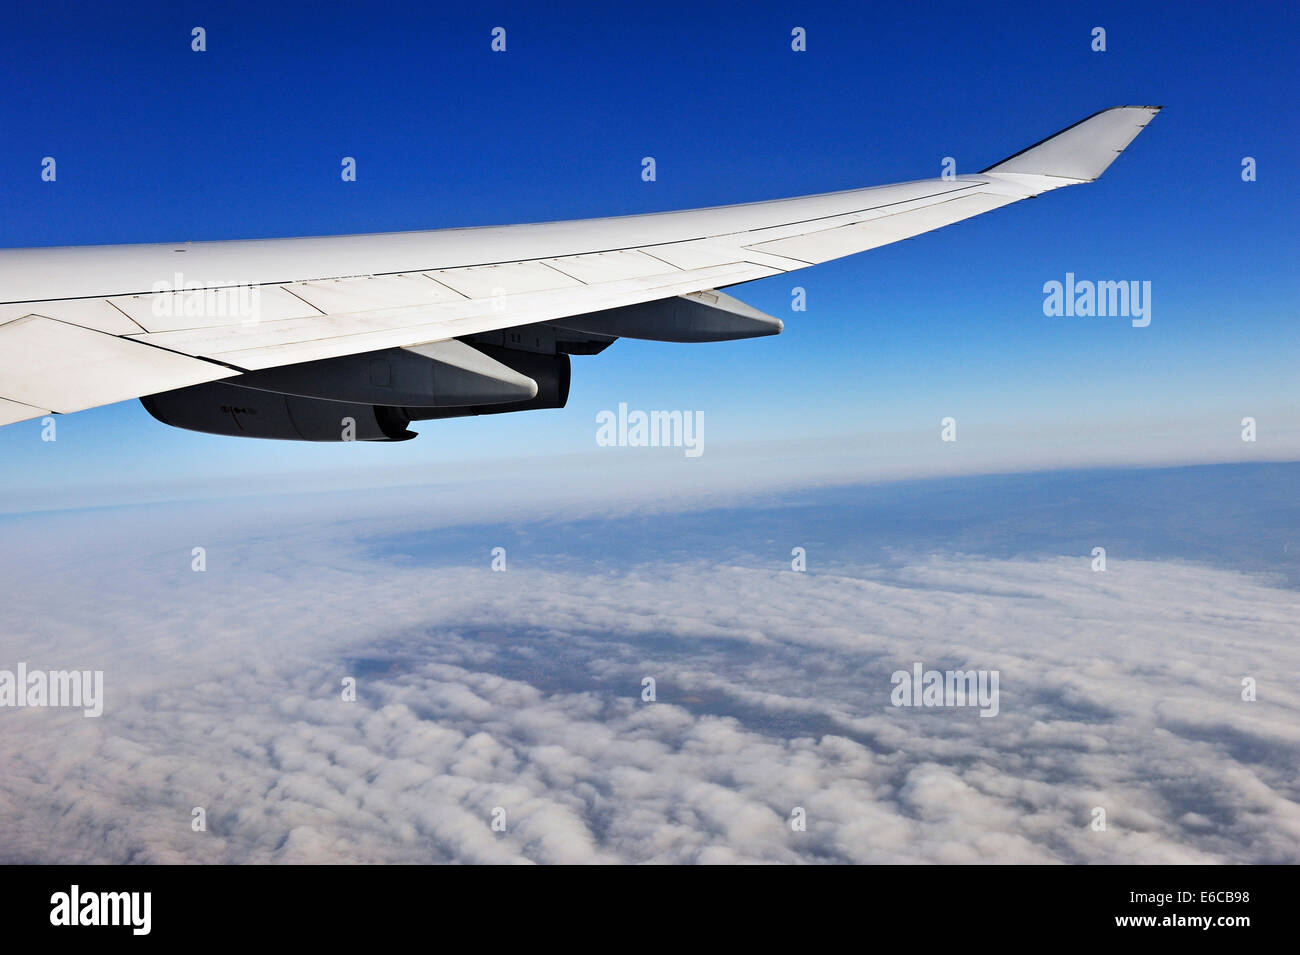 Above the clouds in an aircraft Stock Photo